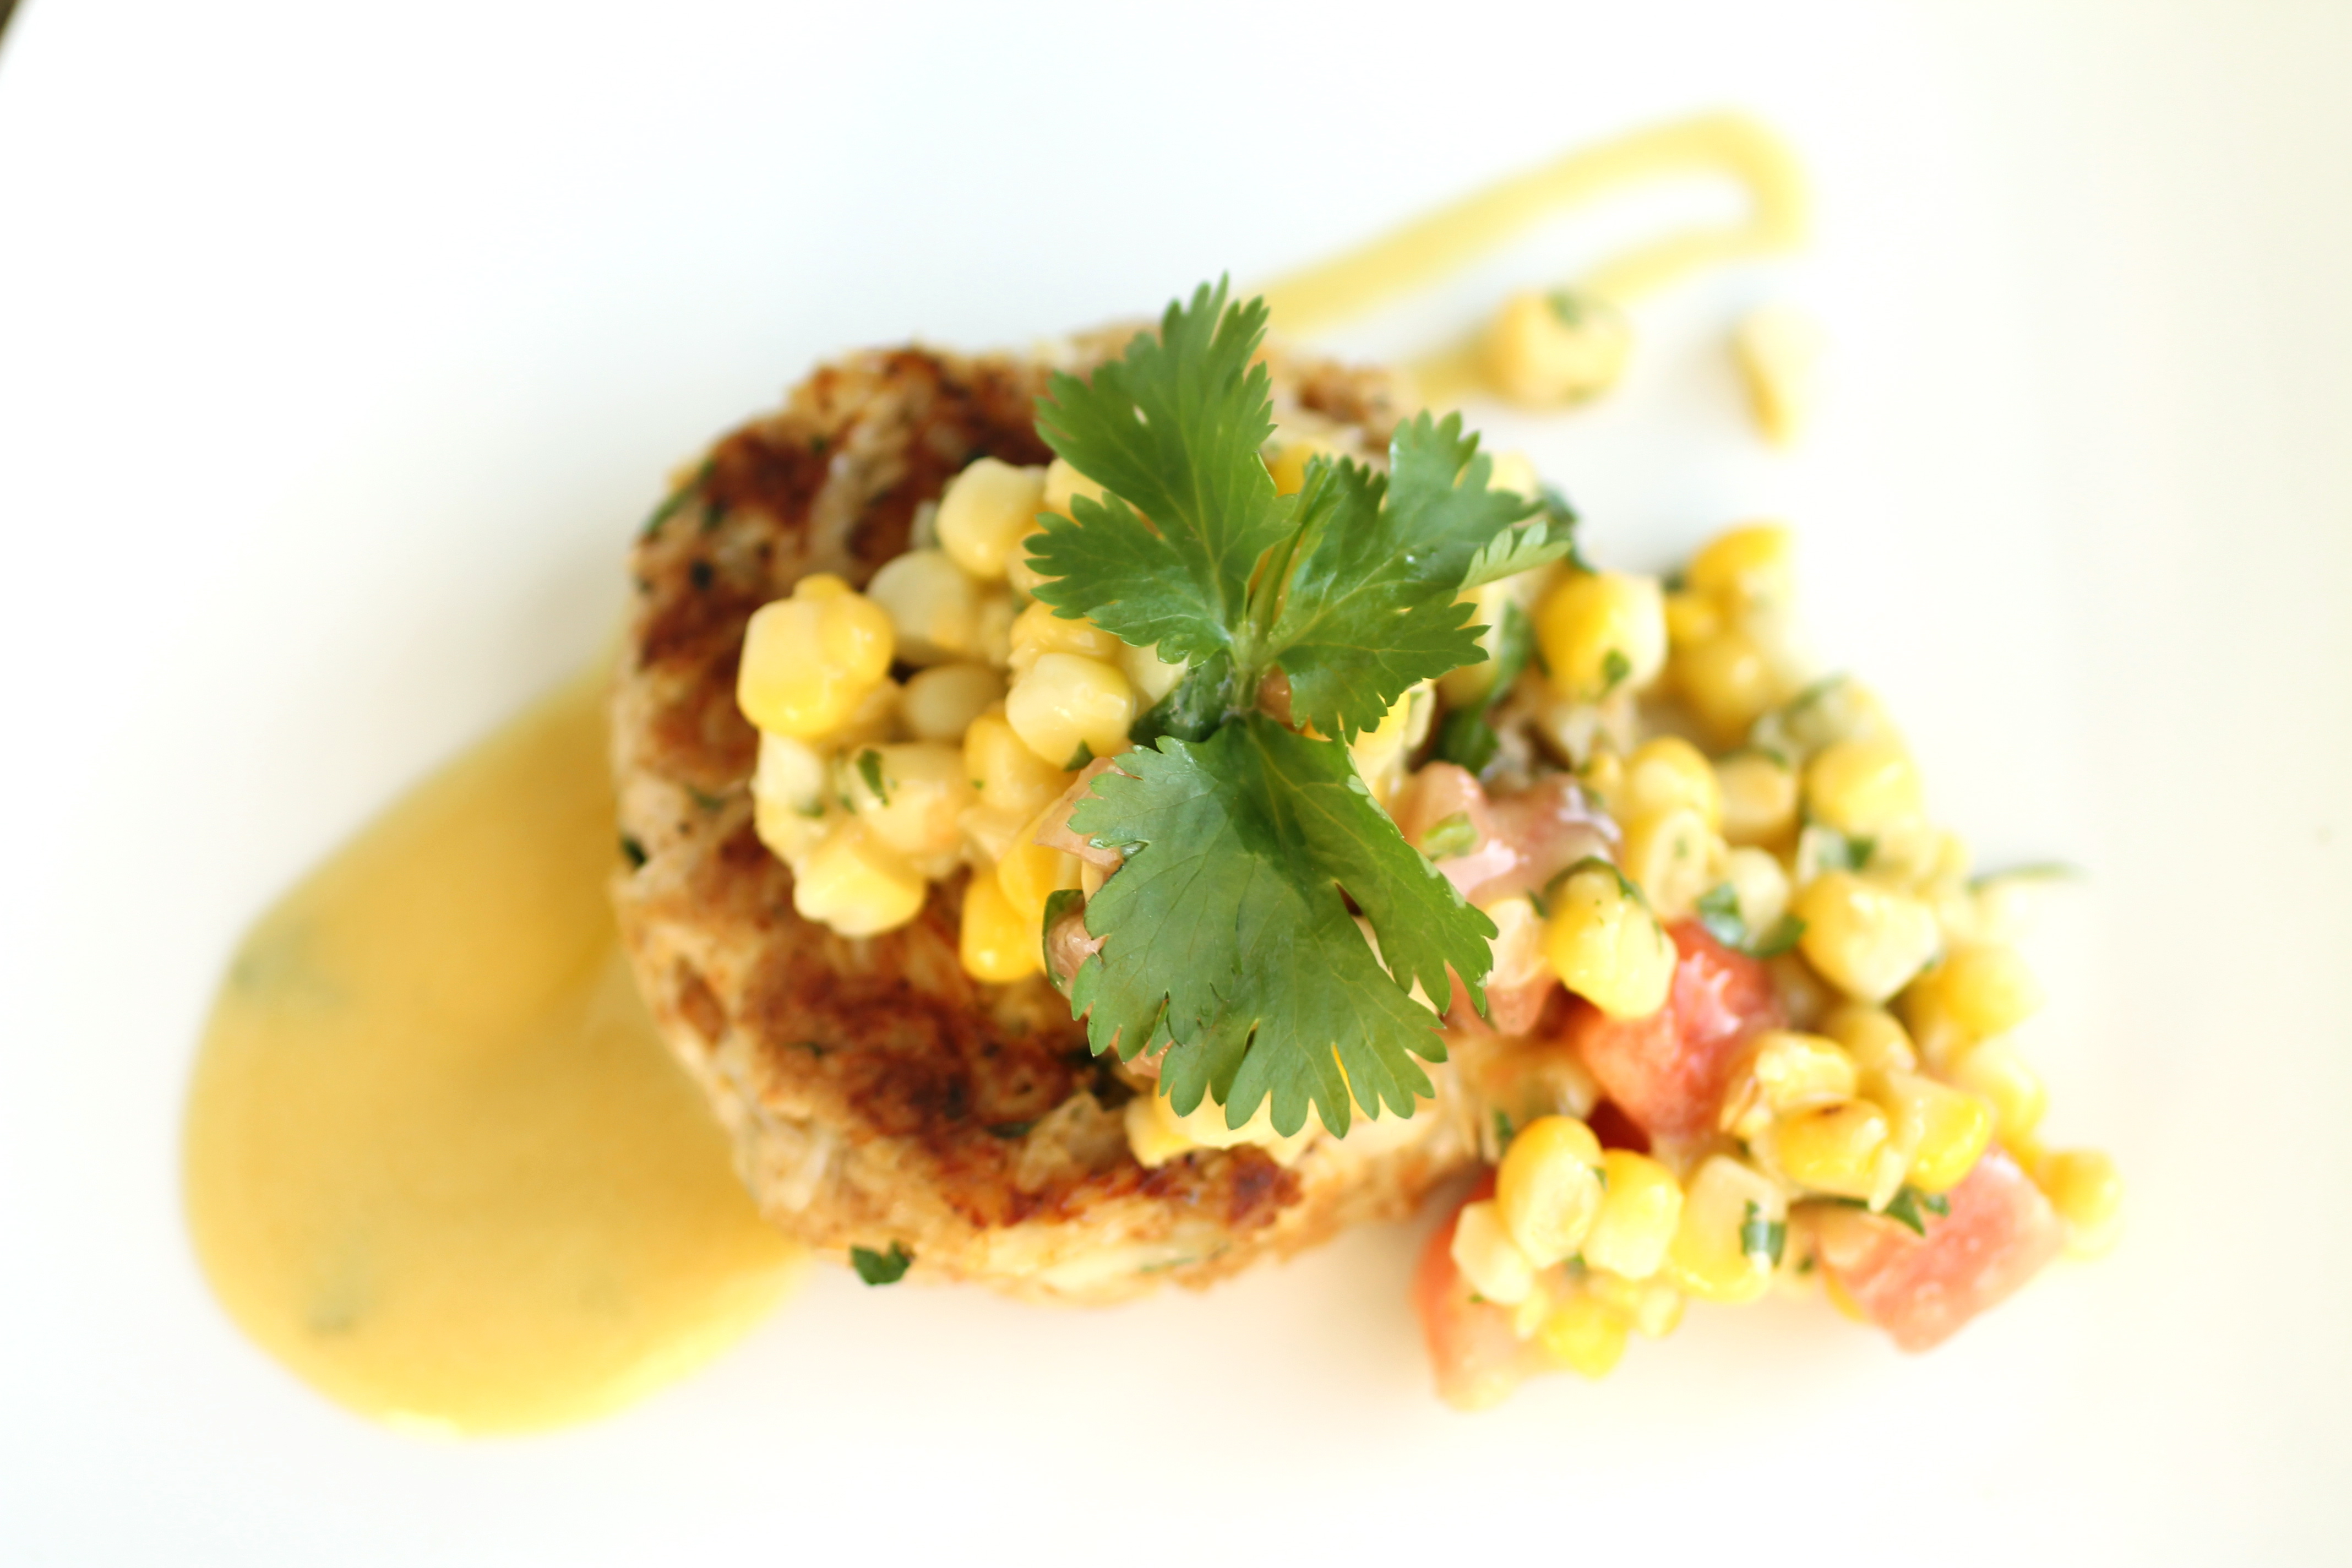 Crab cake topped with corn salsa and a sprig of fresh cilantro atop a white plate with a dollop of mustard sauce.